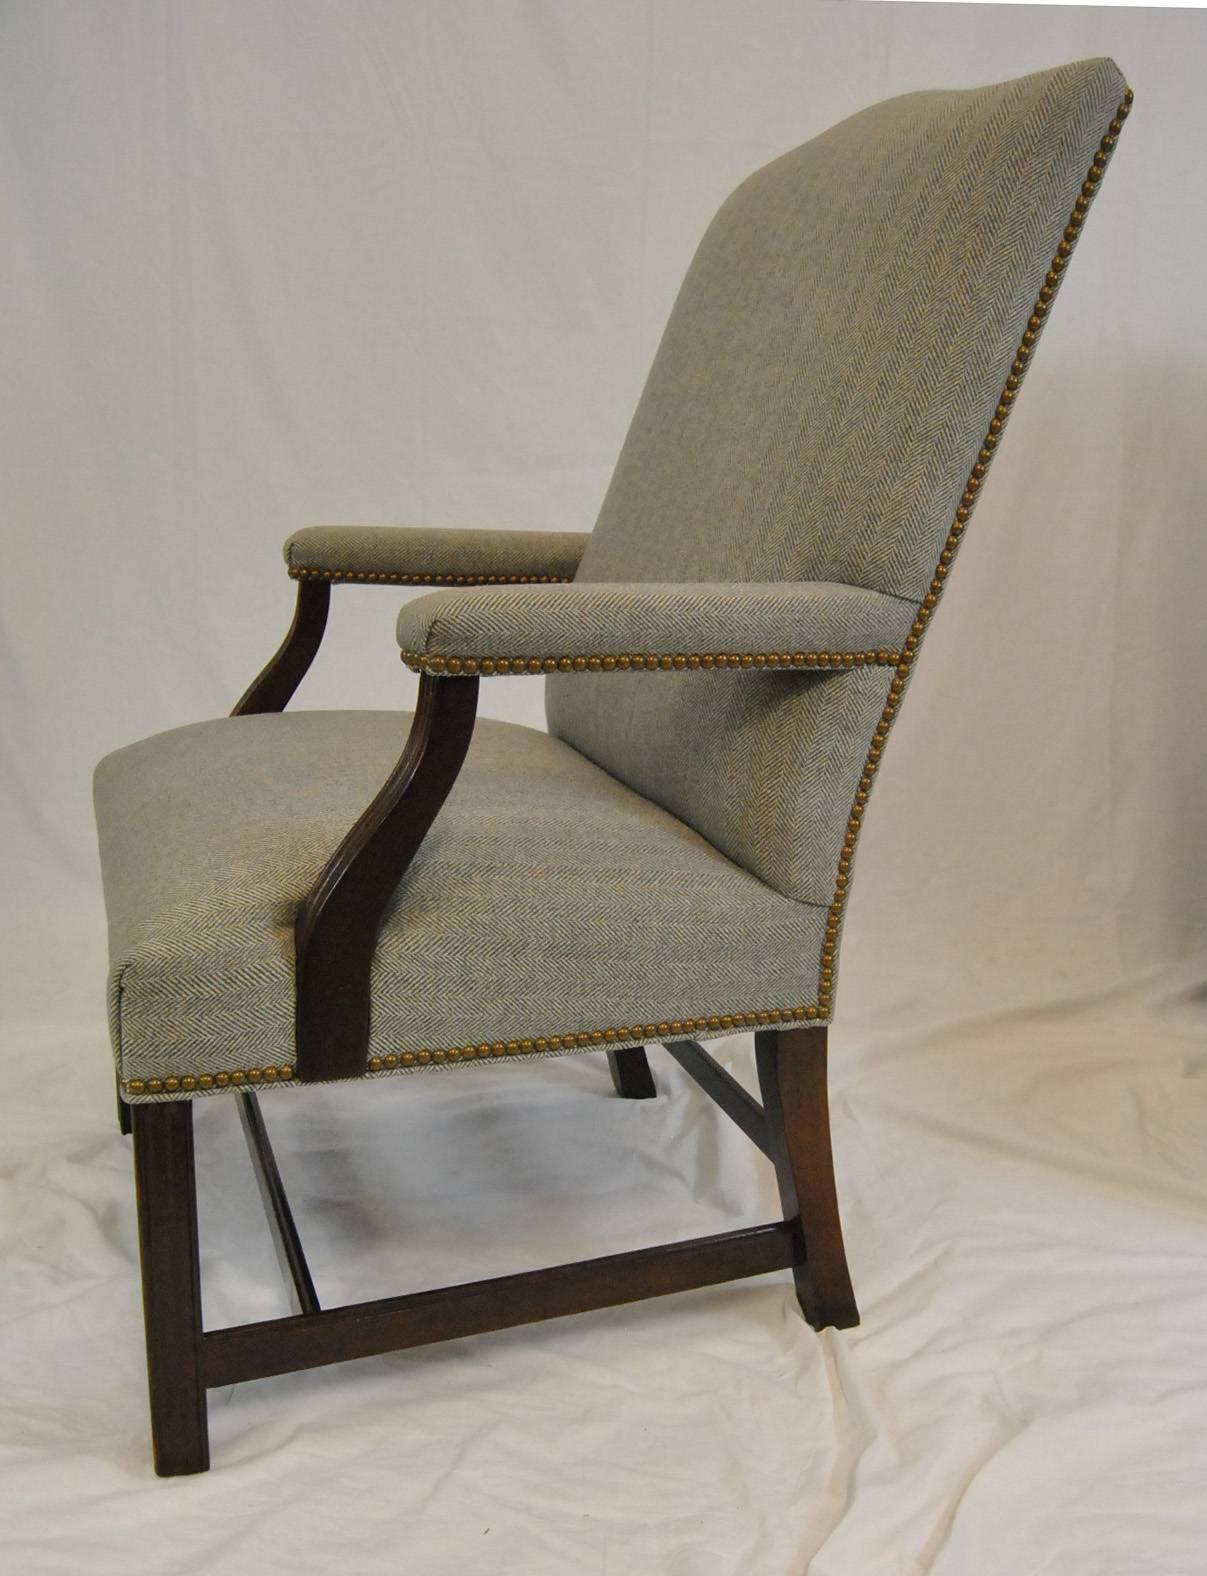 A great pair of Martha Washington style armchairs by Hancock & Moore. This pair has mahogany frames with stretchers for added strength. They are upholstered in a herringbone fabric with nailhead trim. Hancock & Moore tag is on the bottom of chair.